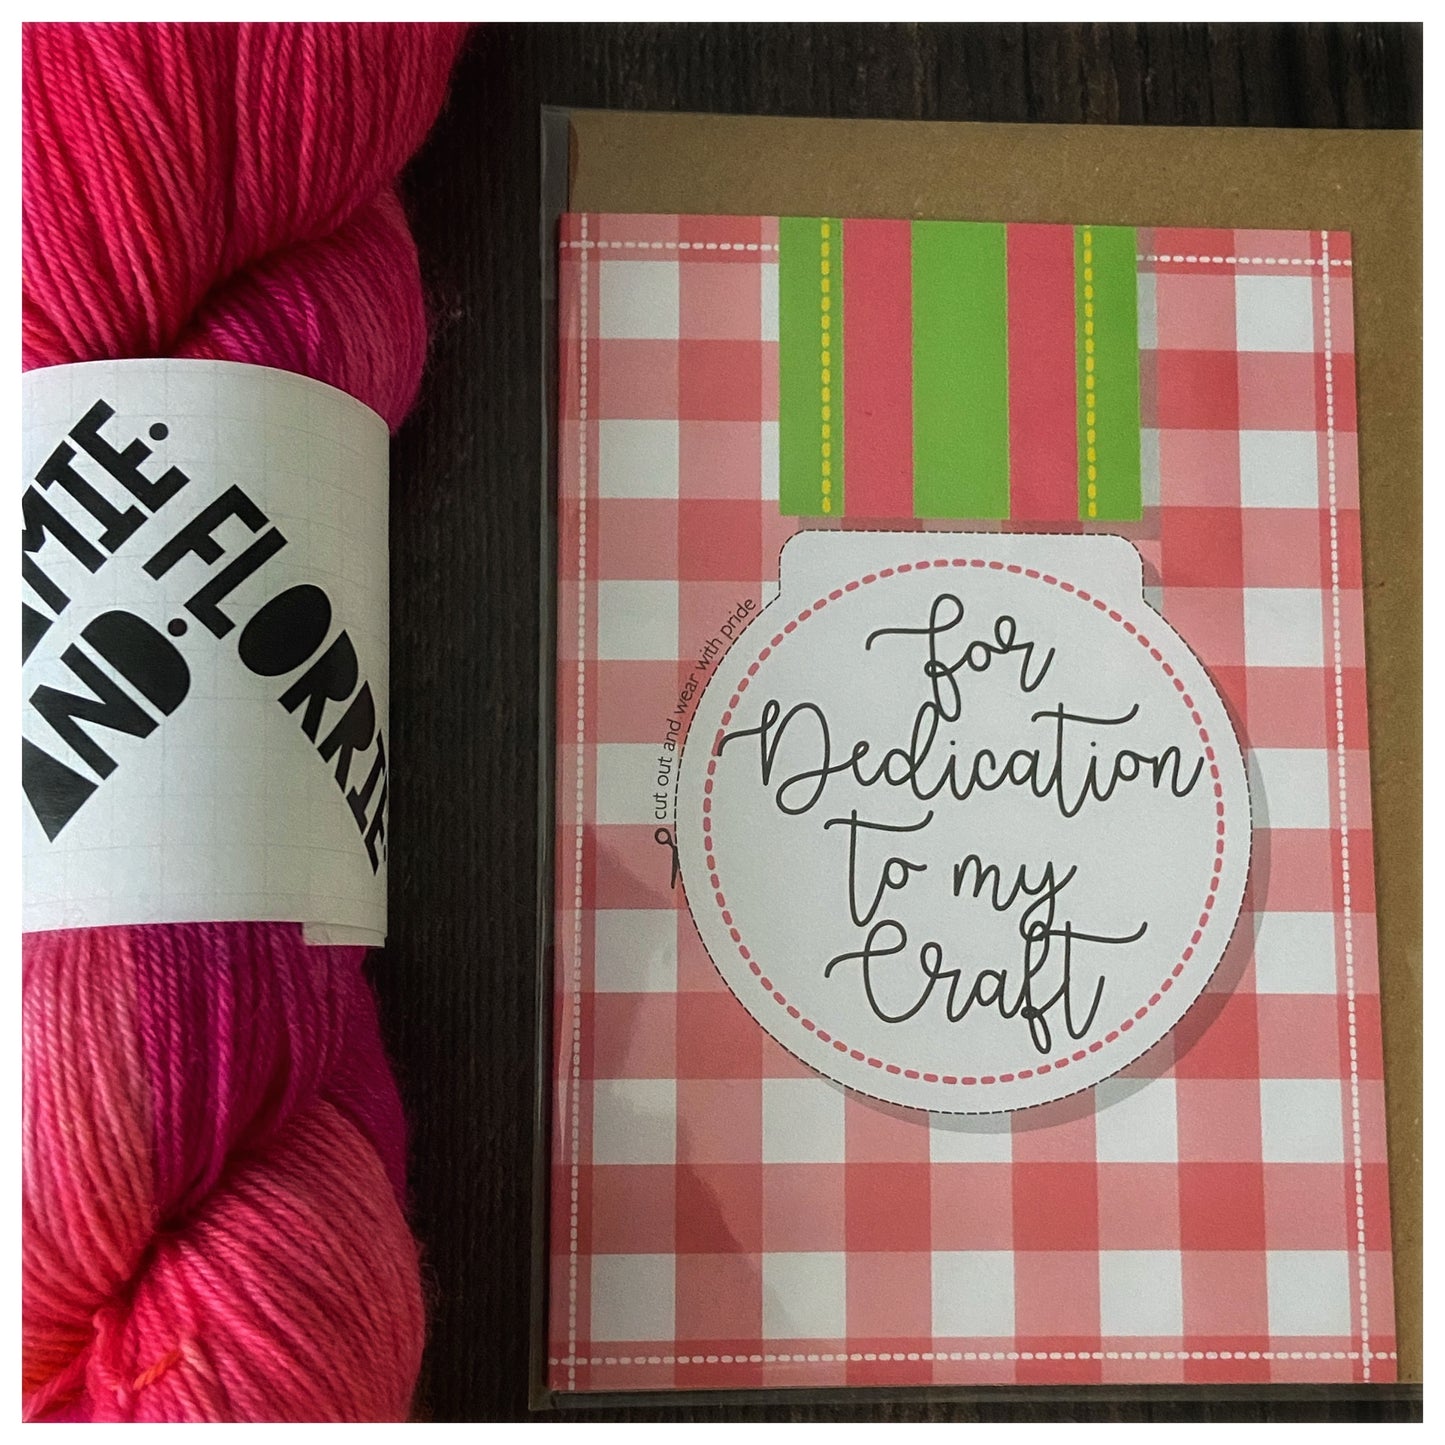 "For Dedication to my Craft" Card by Tilly Flop Designs